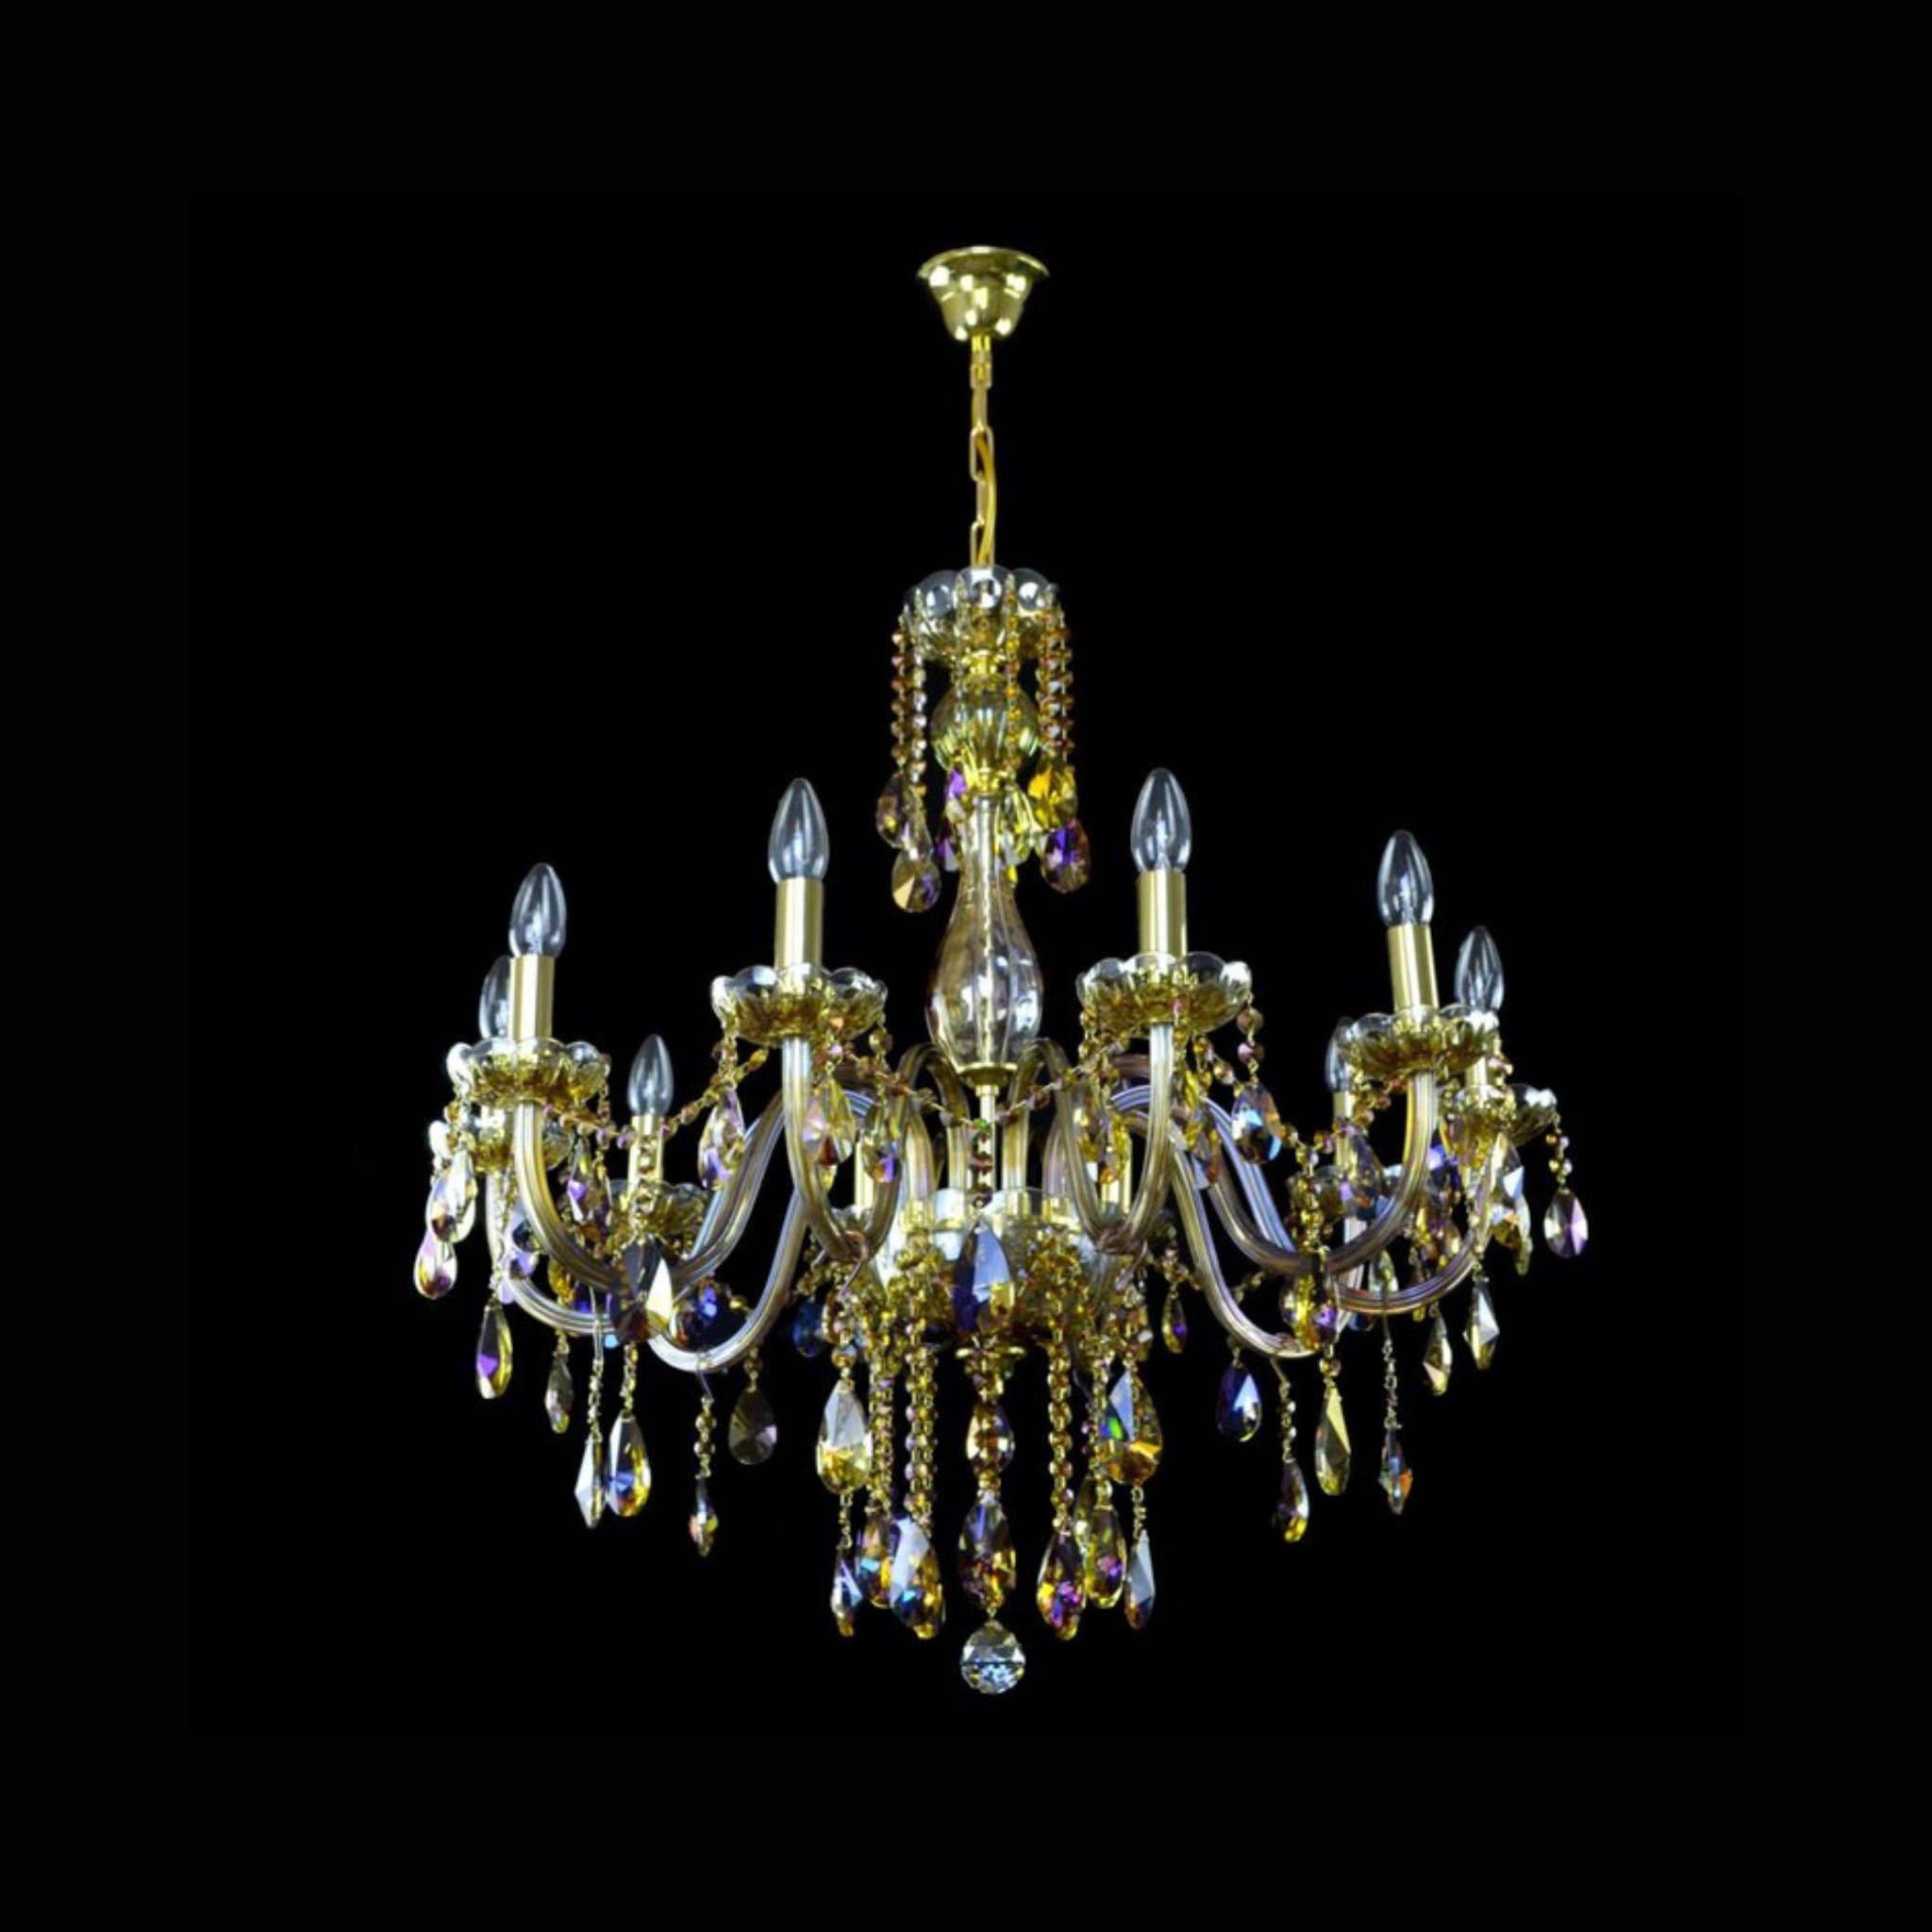 Clarit 10 Crystal Glass Chandelier - Wranovsky - Luxury Lighting Boutique